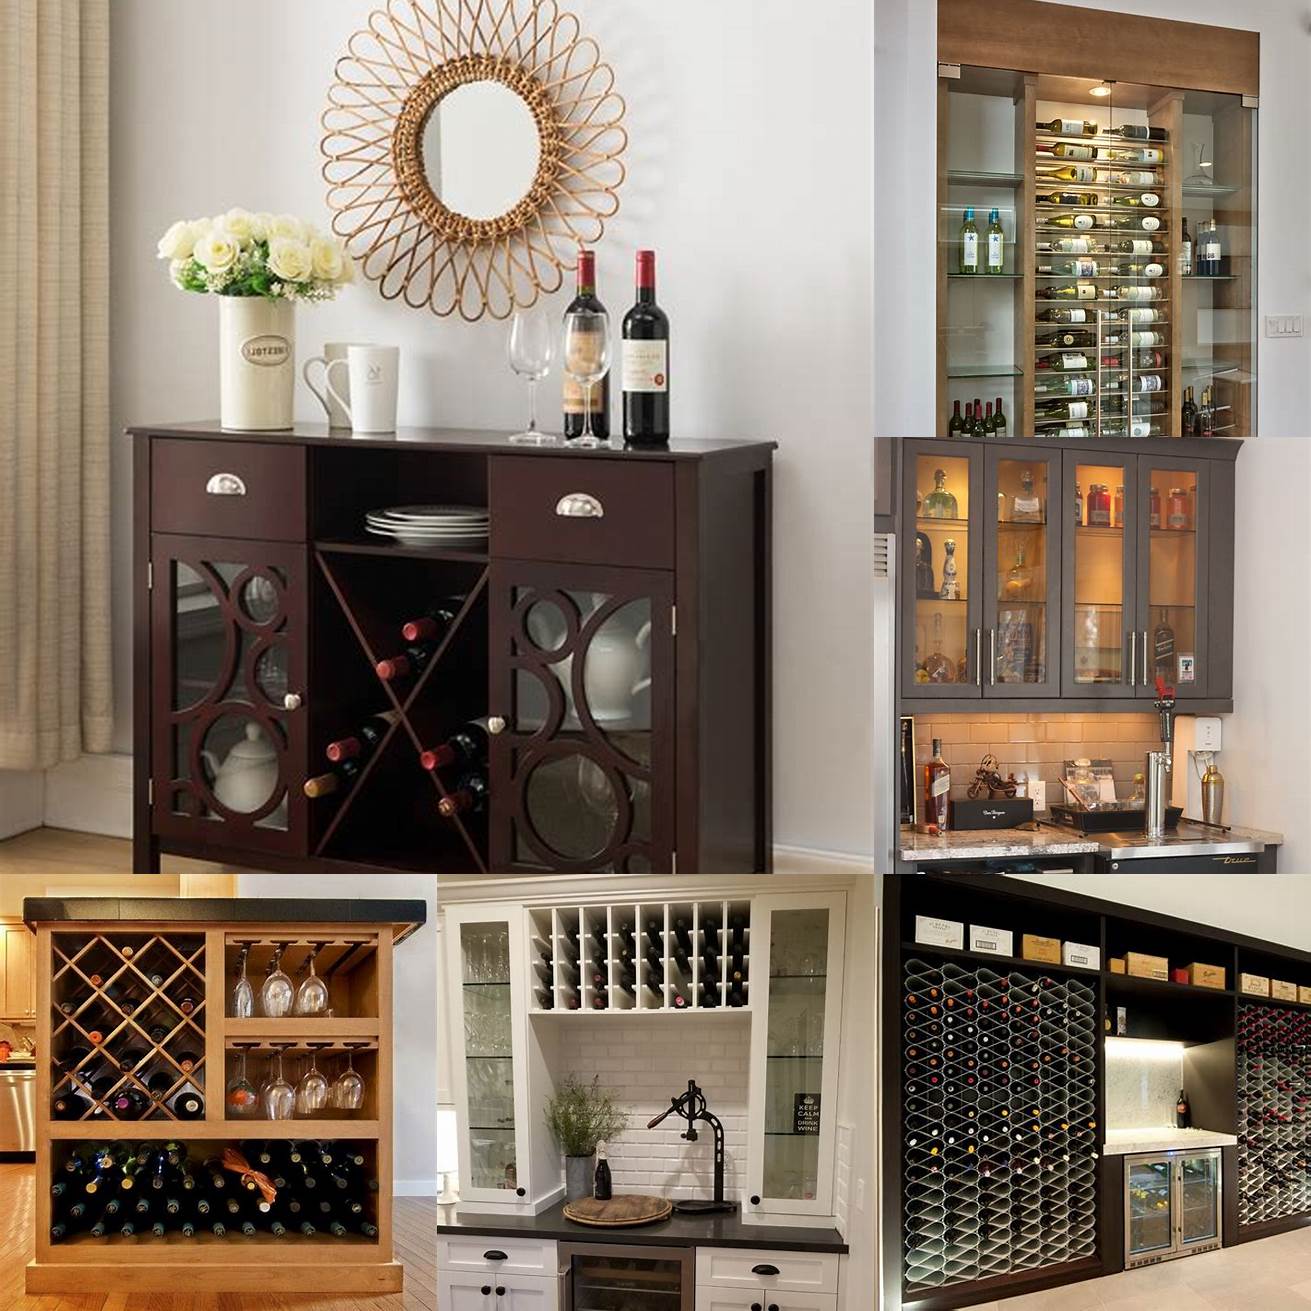 Some servers come with built-in wine racks or glass holders